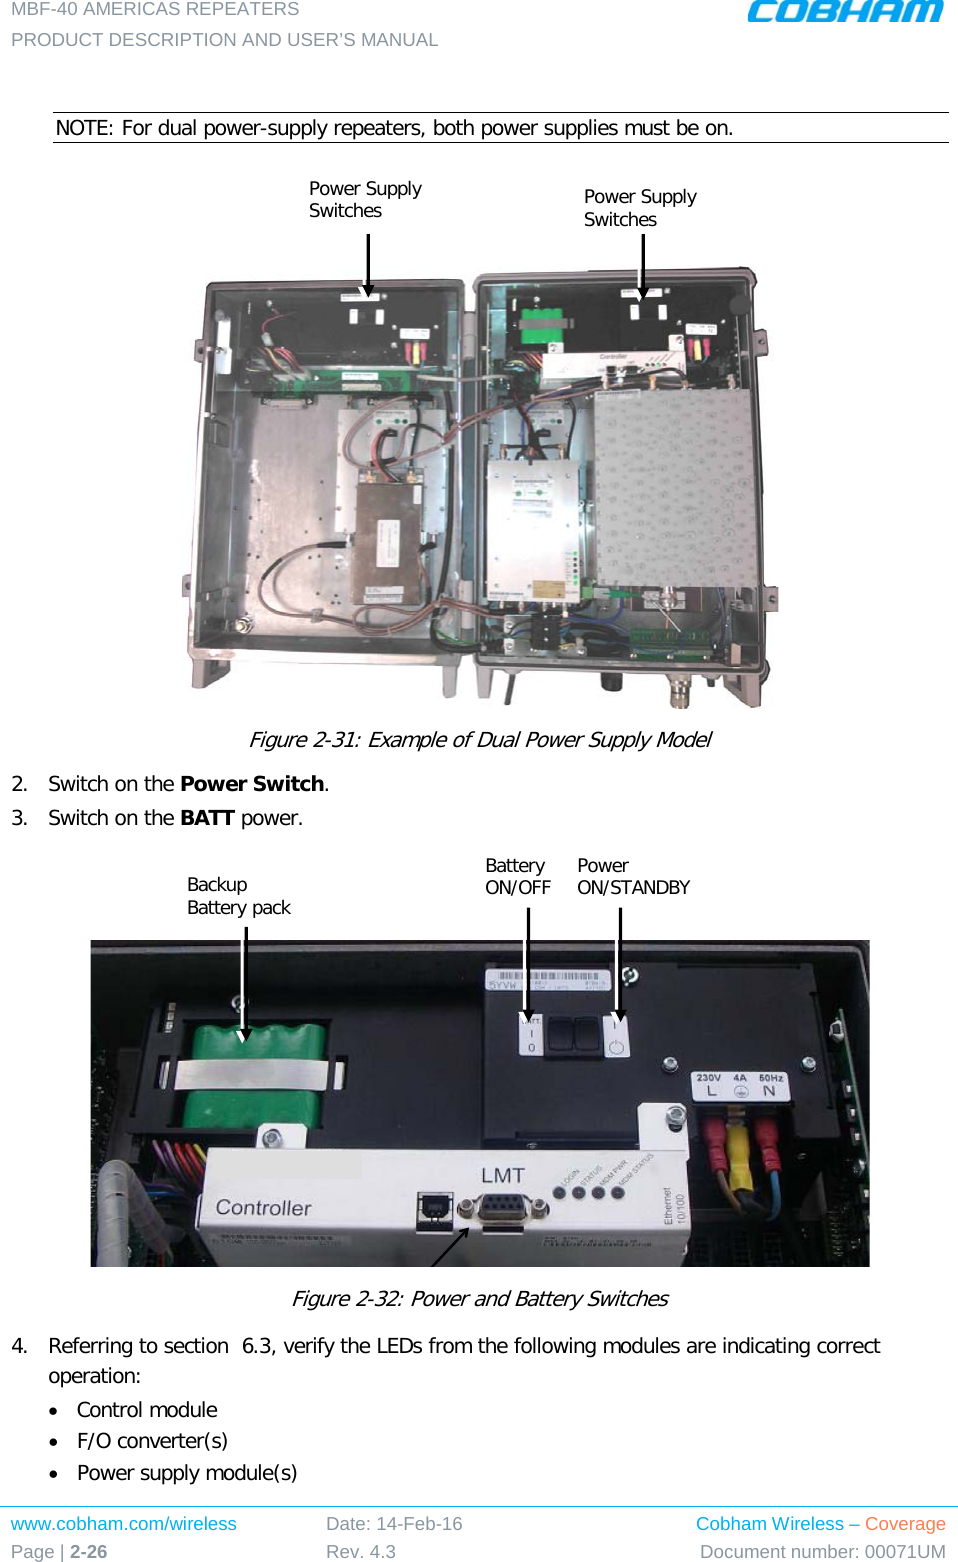 MBF-40 AMERICAS REPEATERS PRODUCT DESCRIPTION AND USER’S MANUAL www.cobham.com/wireless Page | 2-26 Date: 14-Feb-16 Rev. 4.3 Cobham Wireless – Coverage Document number: 00071UM   NOTE: For dual power-supply repeaters, both power supplies must be on.    Figure  2-31: Example of Dual Power Supply Model 2.  Switch on the Power Switch. 3.  Switch on the BATT power.     Figure  2-32: Power and Battery Switches 4.  Referring to section   6.3, verify the LEDs from the following modules are indicating correct operation:  • Control module • F/O converter(s) • Power supply module(s)  Power Supply Switches Power Supply Switches Backup Battery pack Battery ON/OFF Power ON/STANDBY 